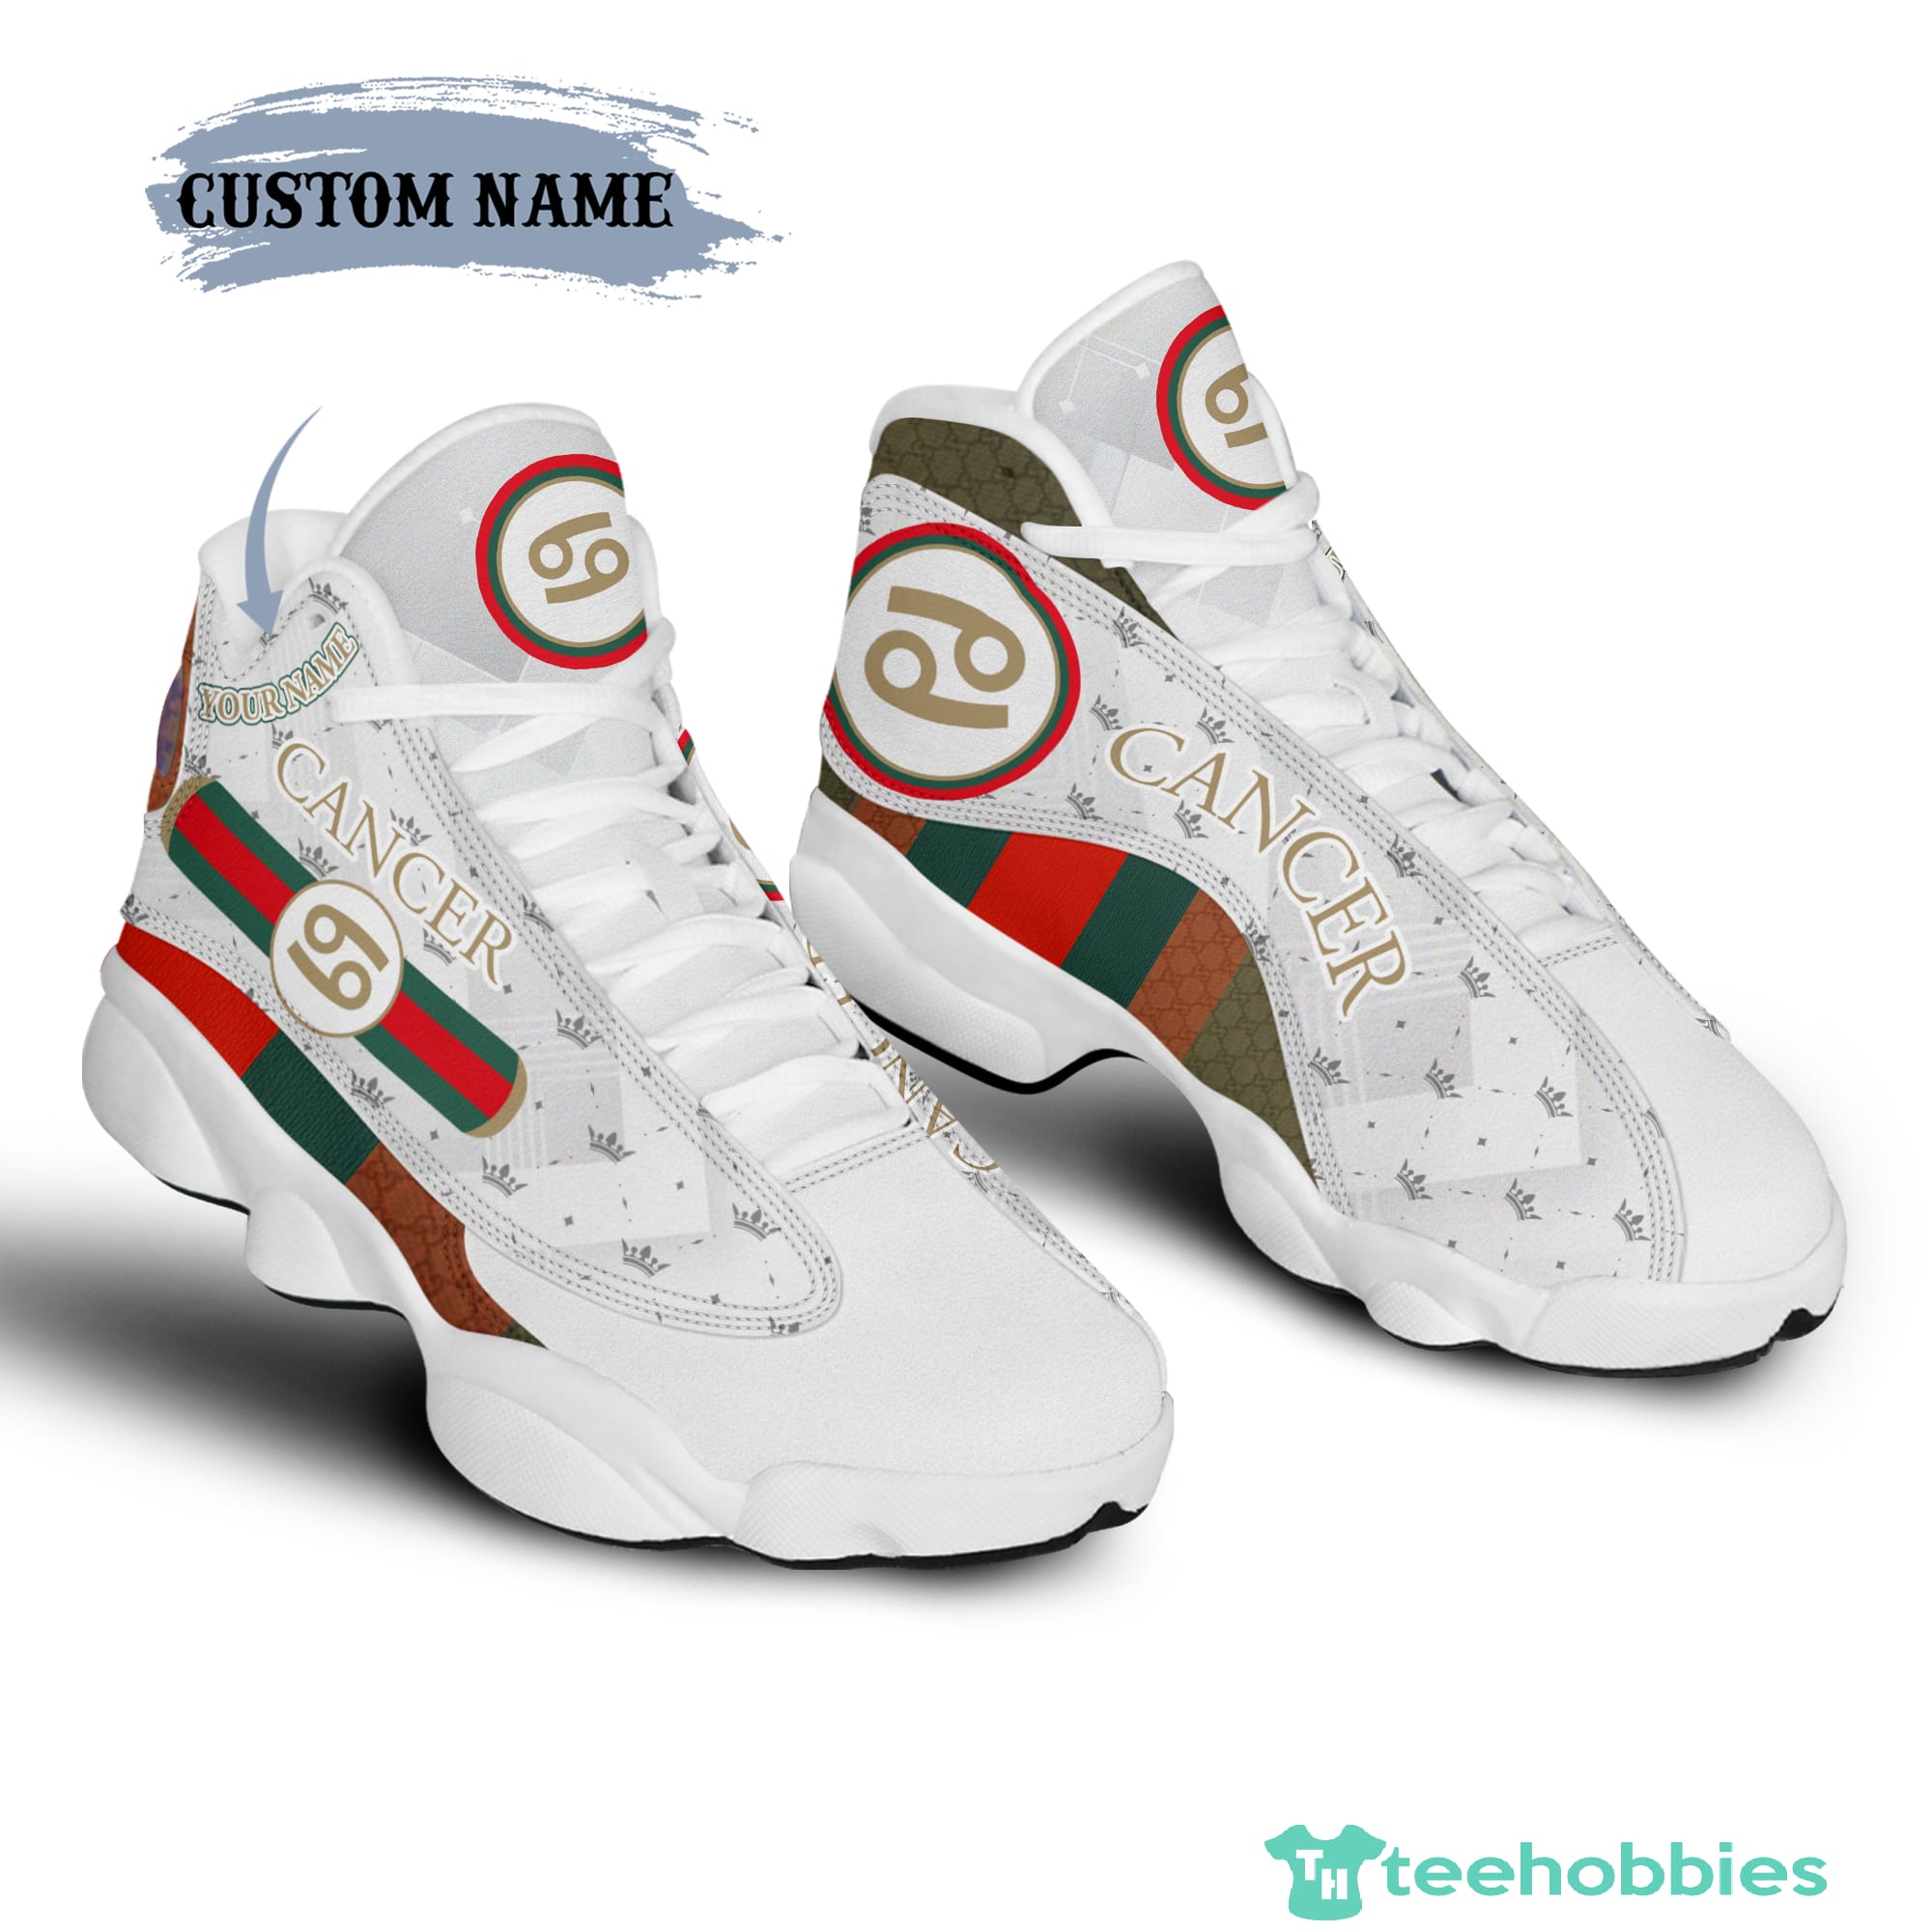 Cancer Zodiac Girl Birthday Gift Gucci Pattern Personalized Name Air Jordan  13 Shoes